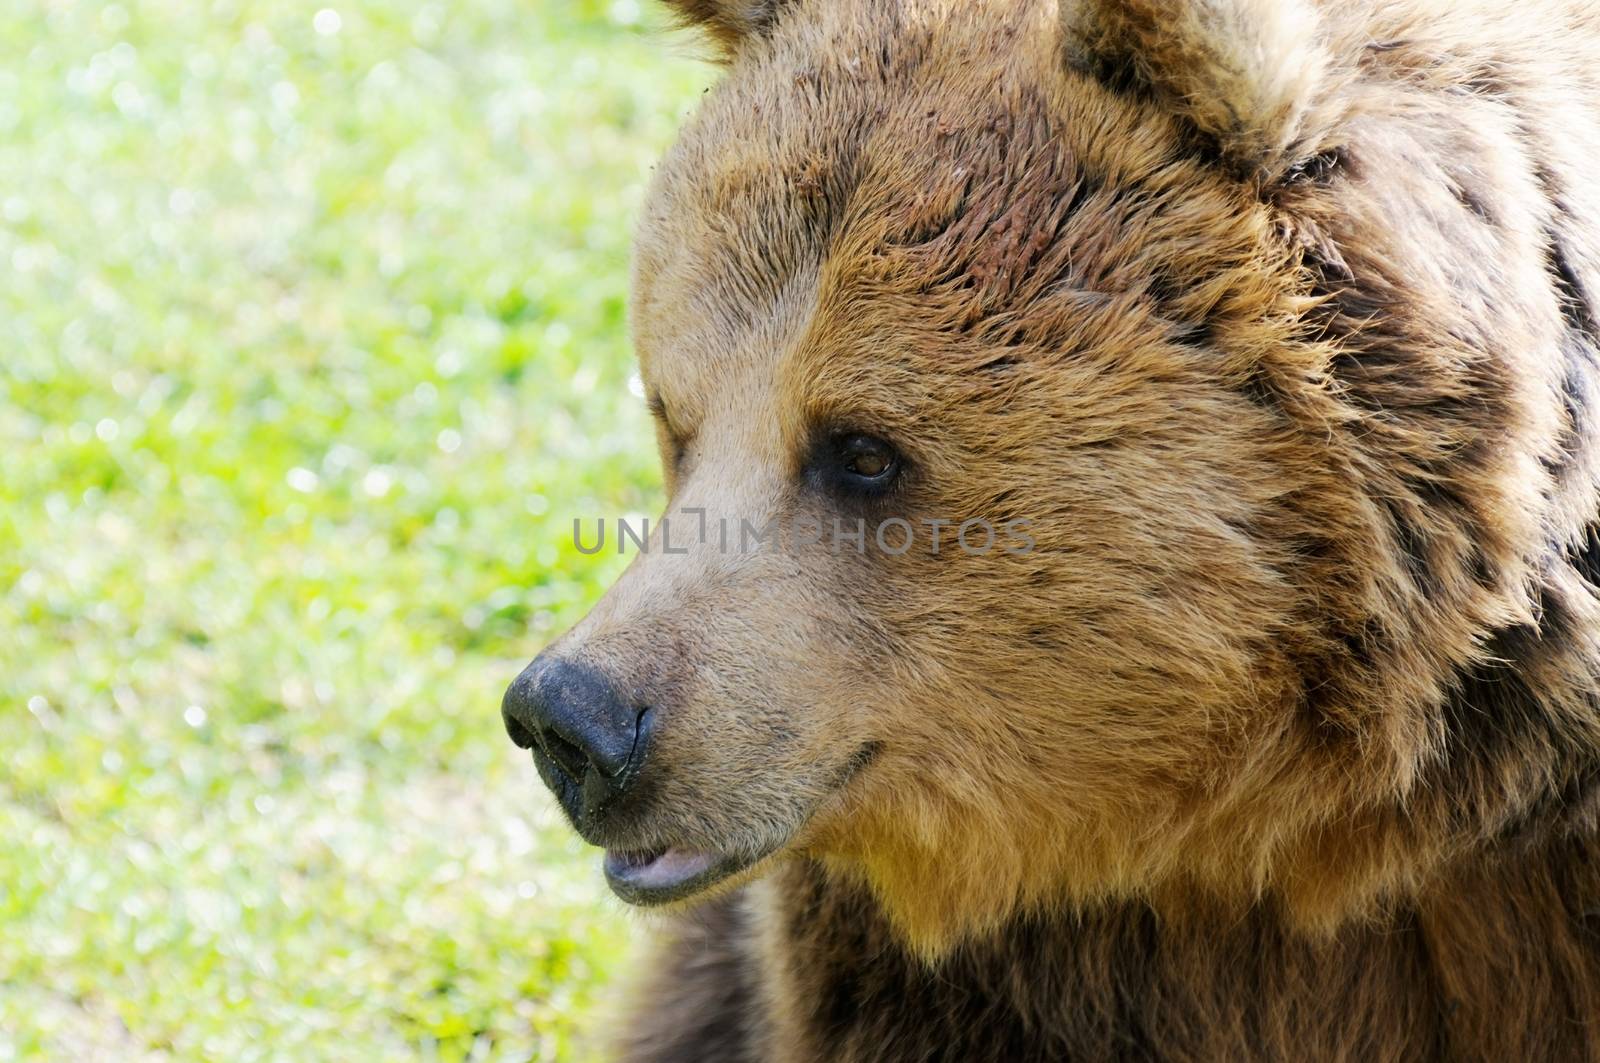 Brown bear profile closeup by kmwphotography